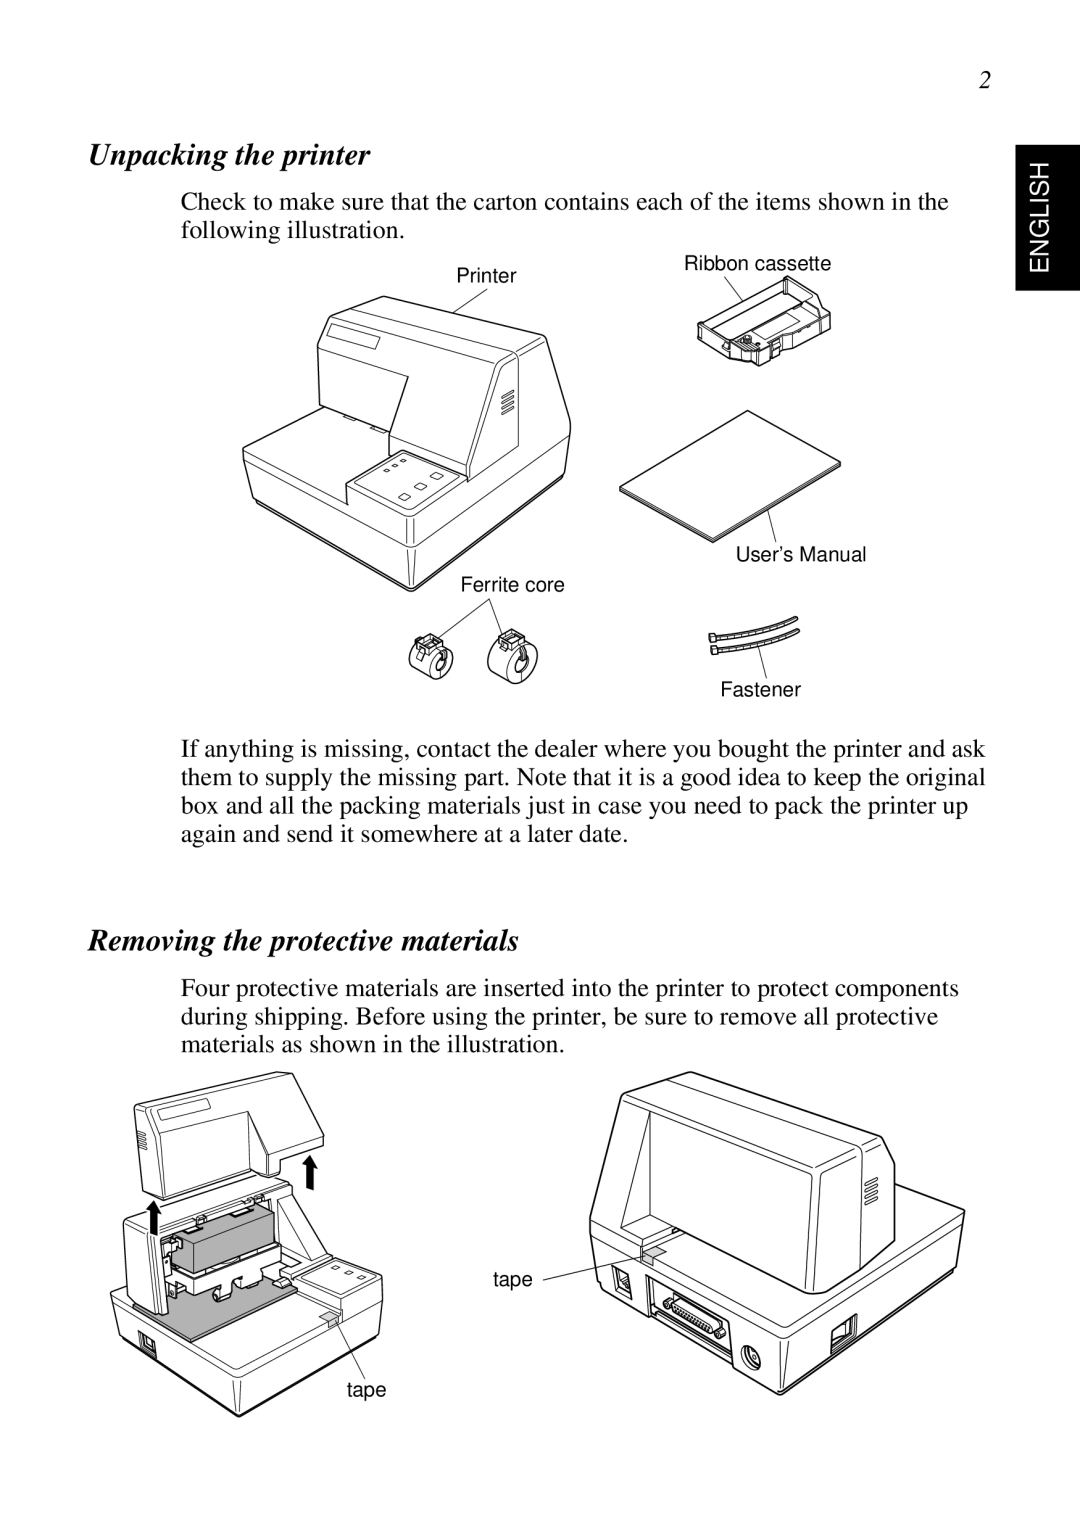 Star Micronics SP298 user manual Unpacking the printer, Removing the protective materials, English 